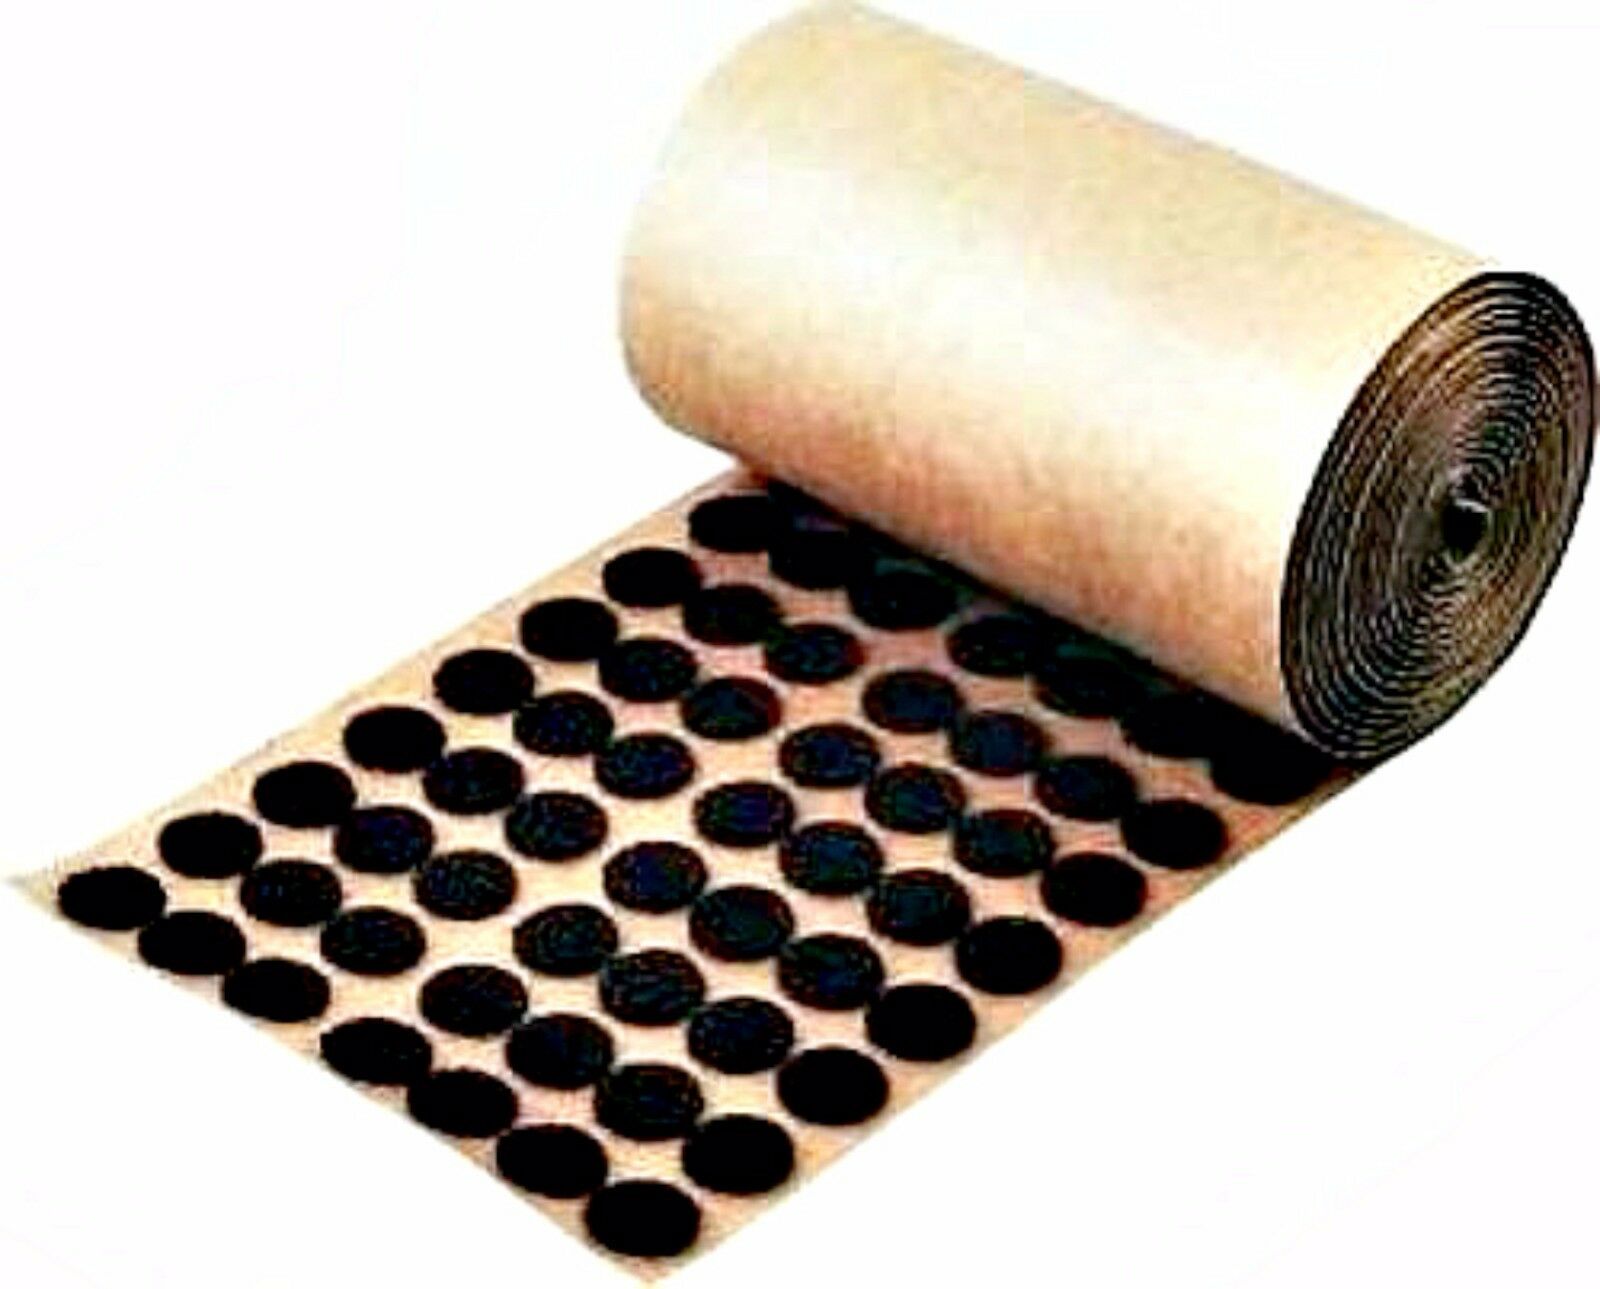 Adhesive Back Felt Buttons 1,000 Brown Dots Pads 1/2" Furniture Protection Usa